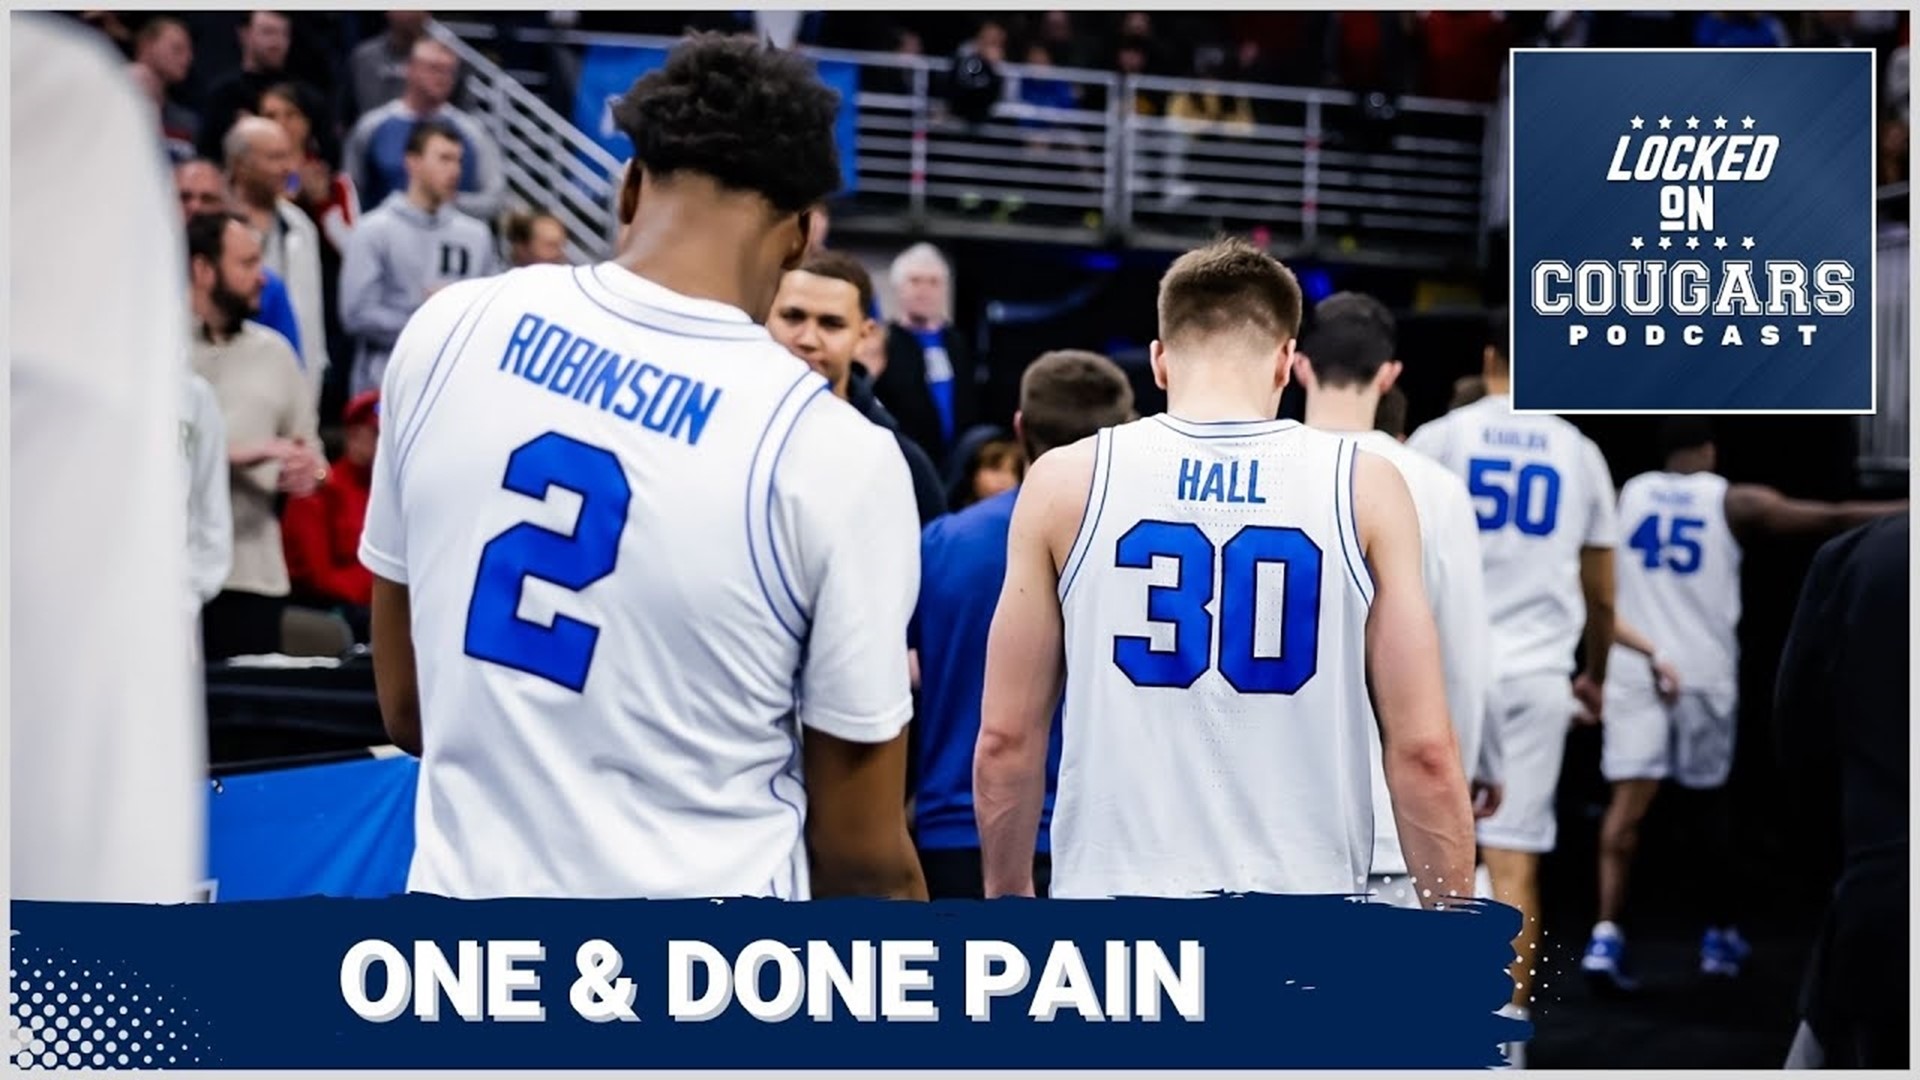 The BYU Cougars were upset in the first round of the NCAA Men's Basketball Tournament by the Duquesne Dukes and Jake Hatch explained what went wrong.